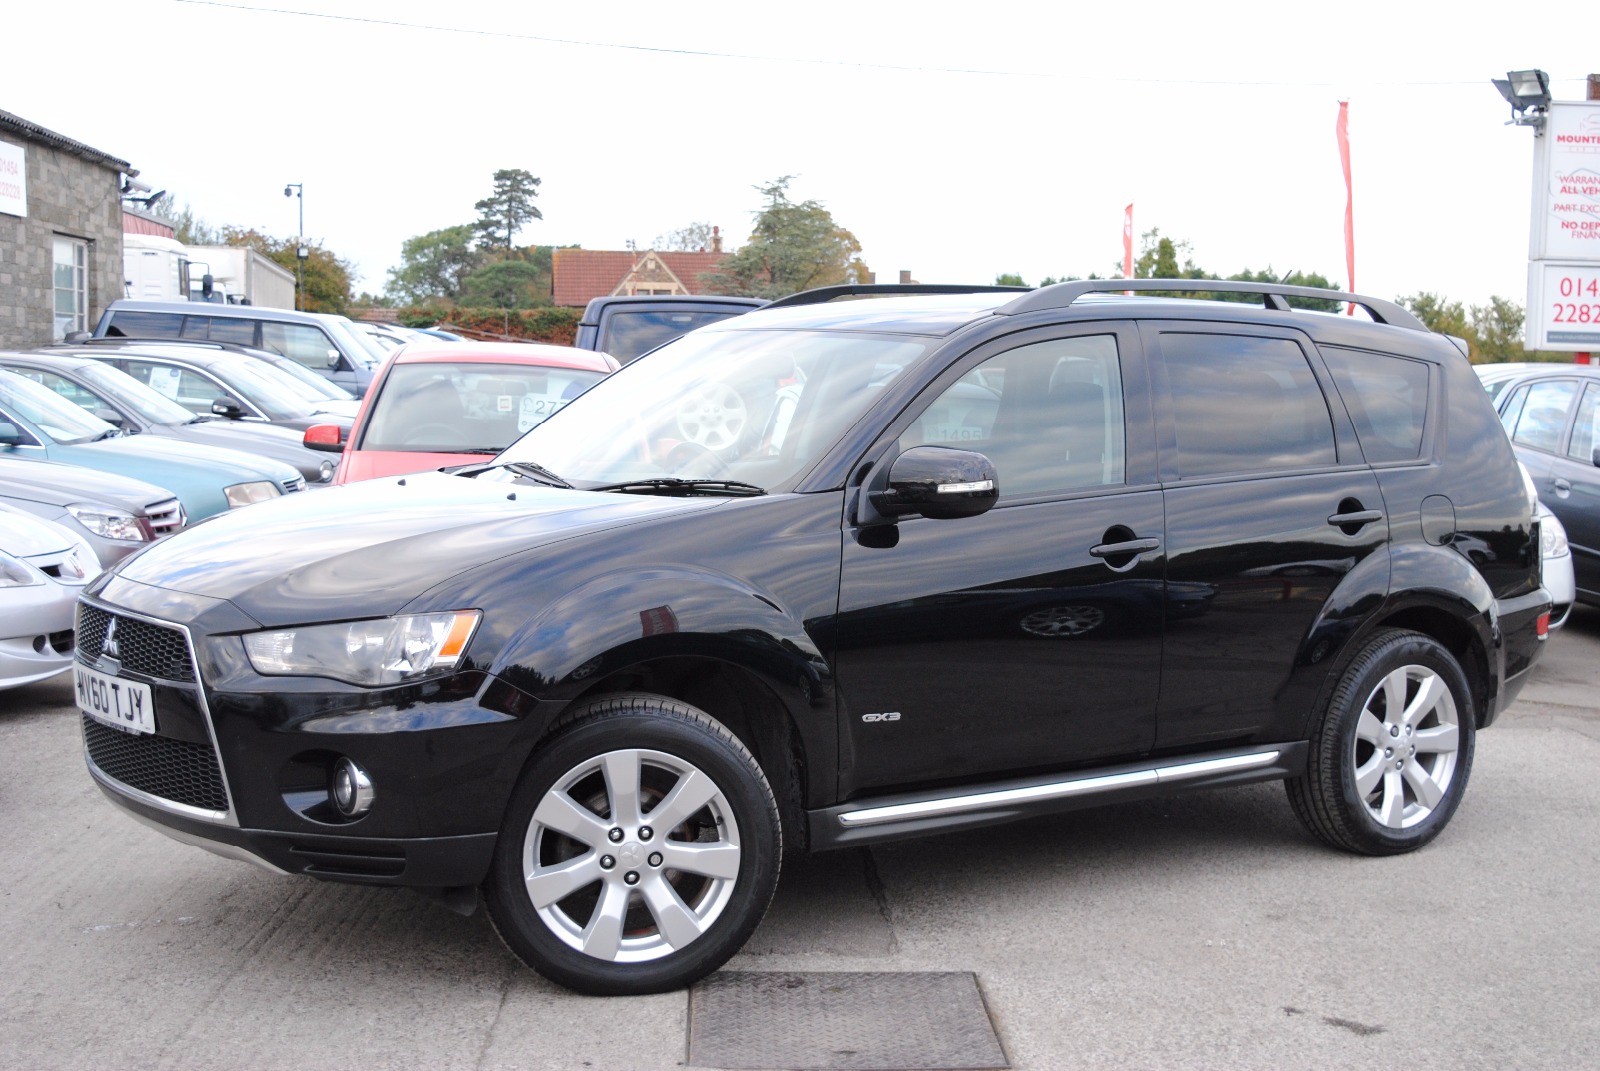 ... to enquire about the vehicle Mitsubishi Outlander 2.2 DI-D 4WD GX3